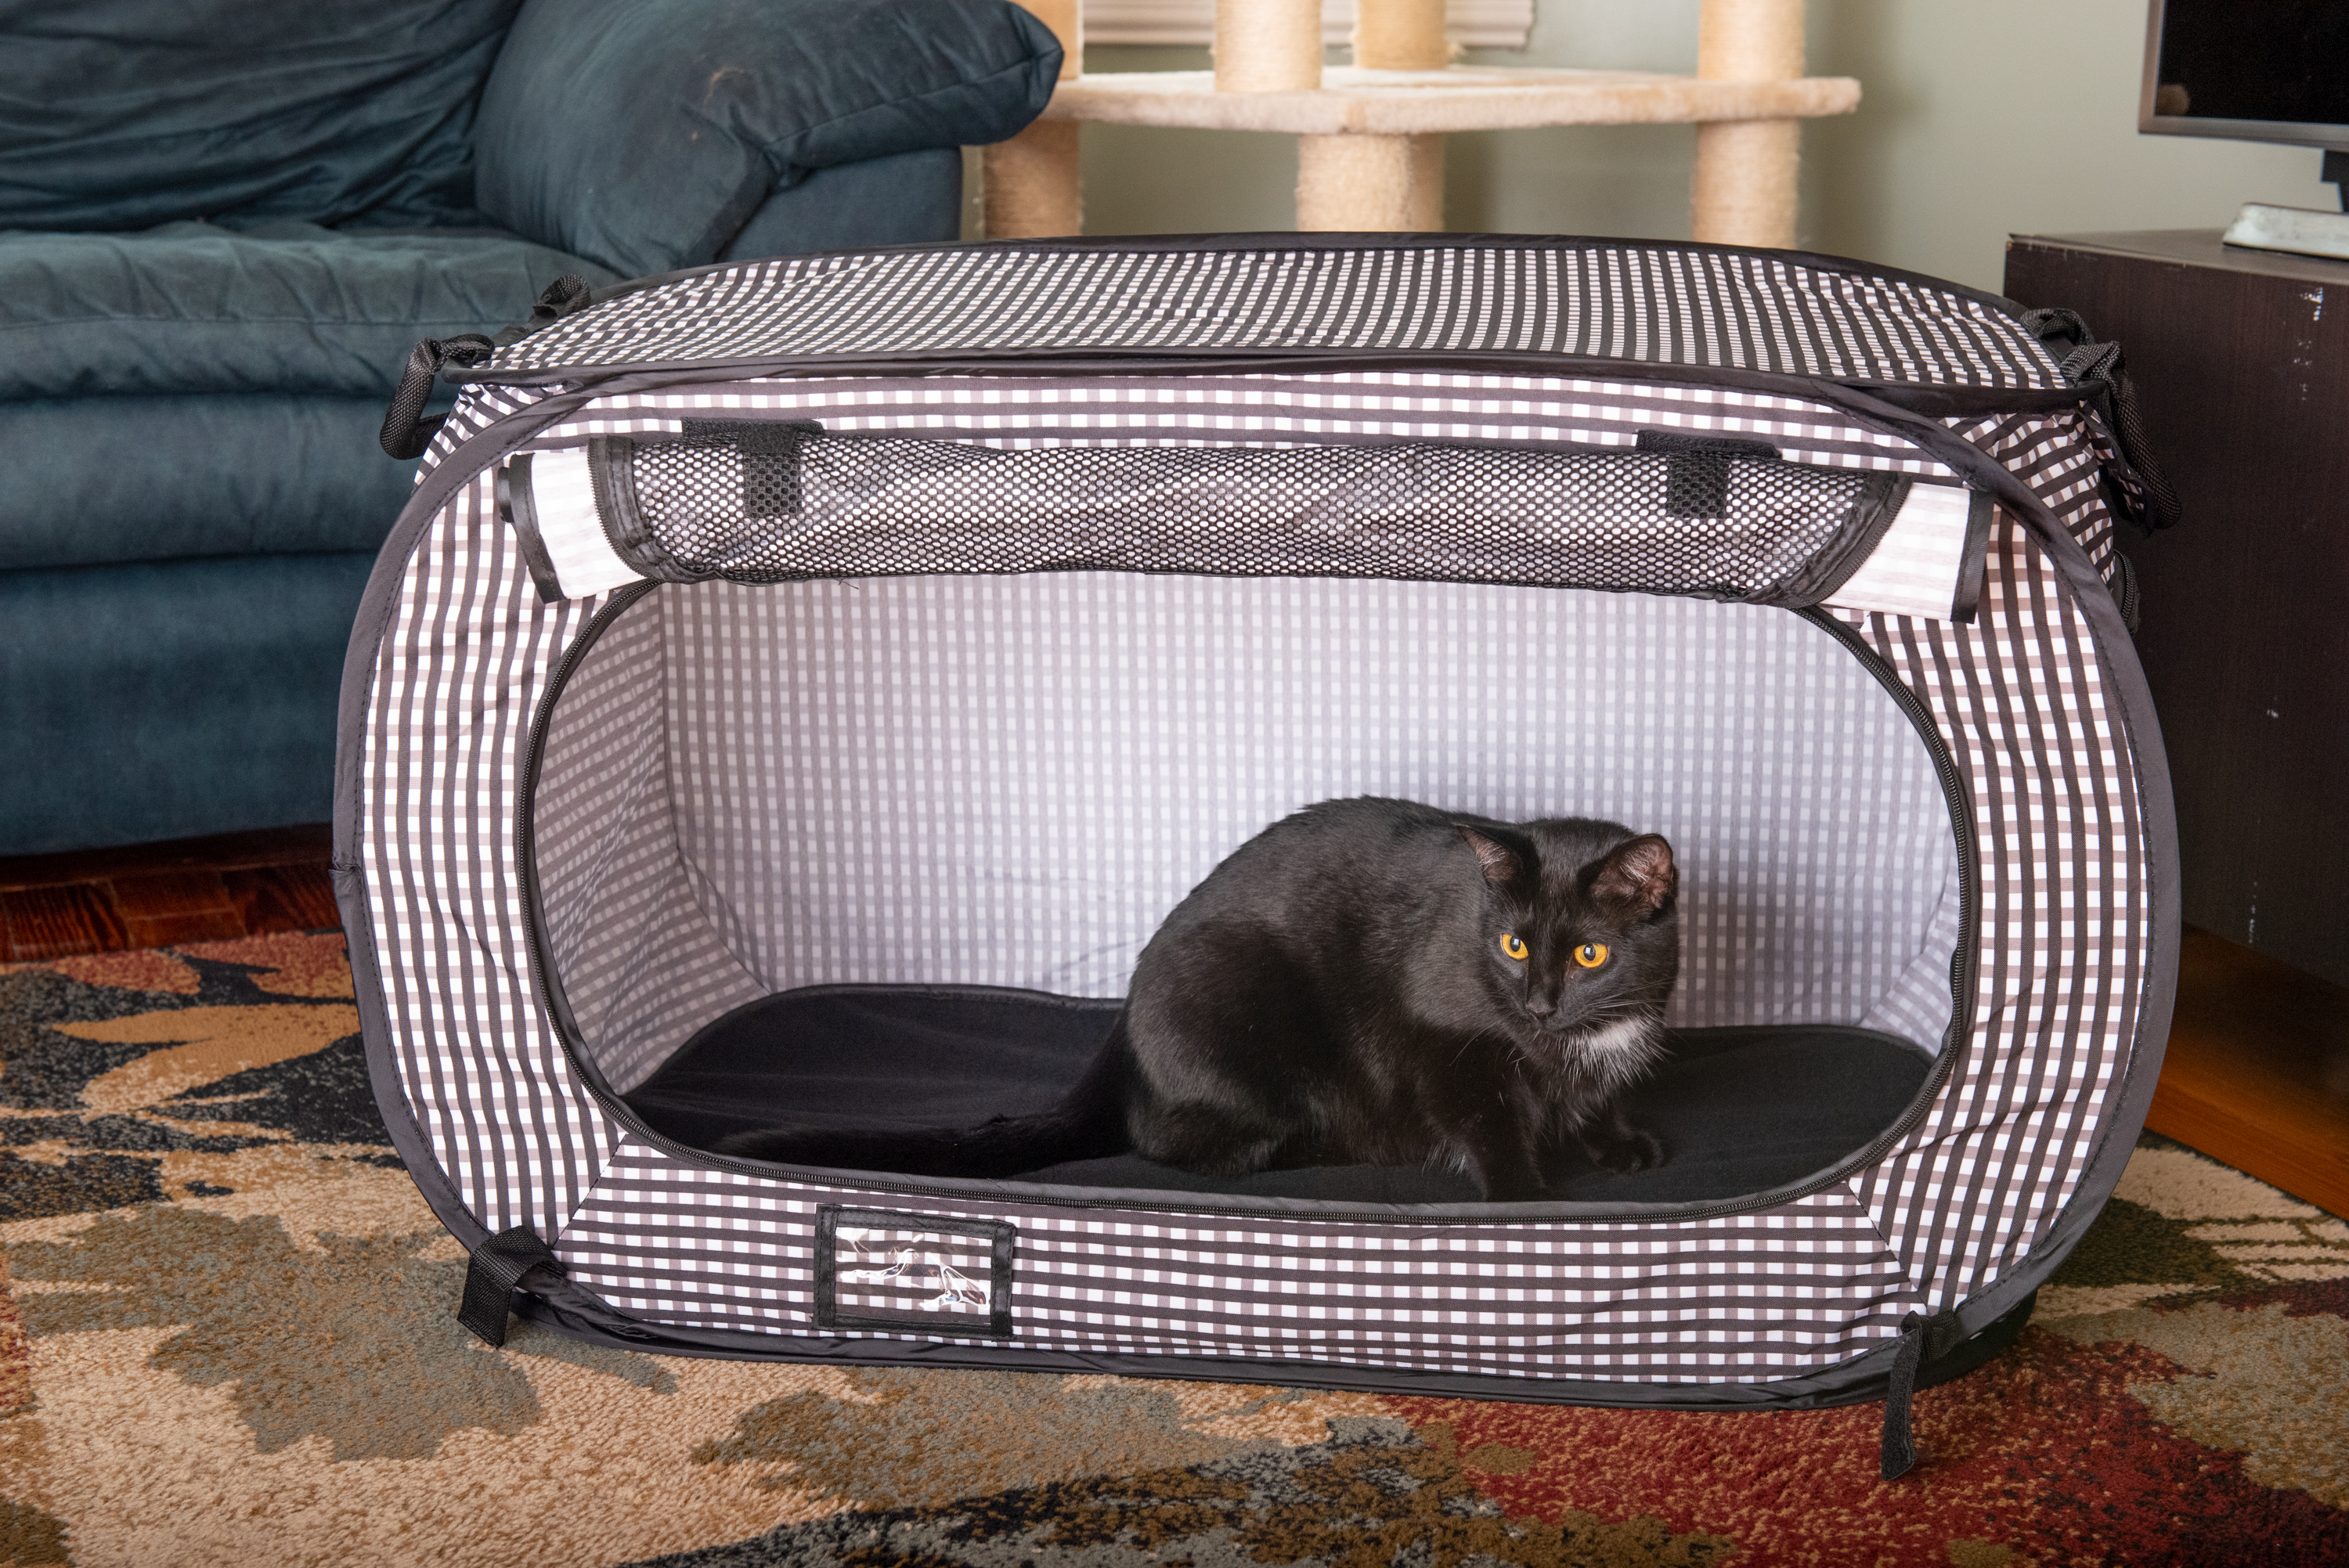 A black cat is seen sitting in a black & white checkered collapsible travel cat crate from Necoichi